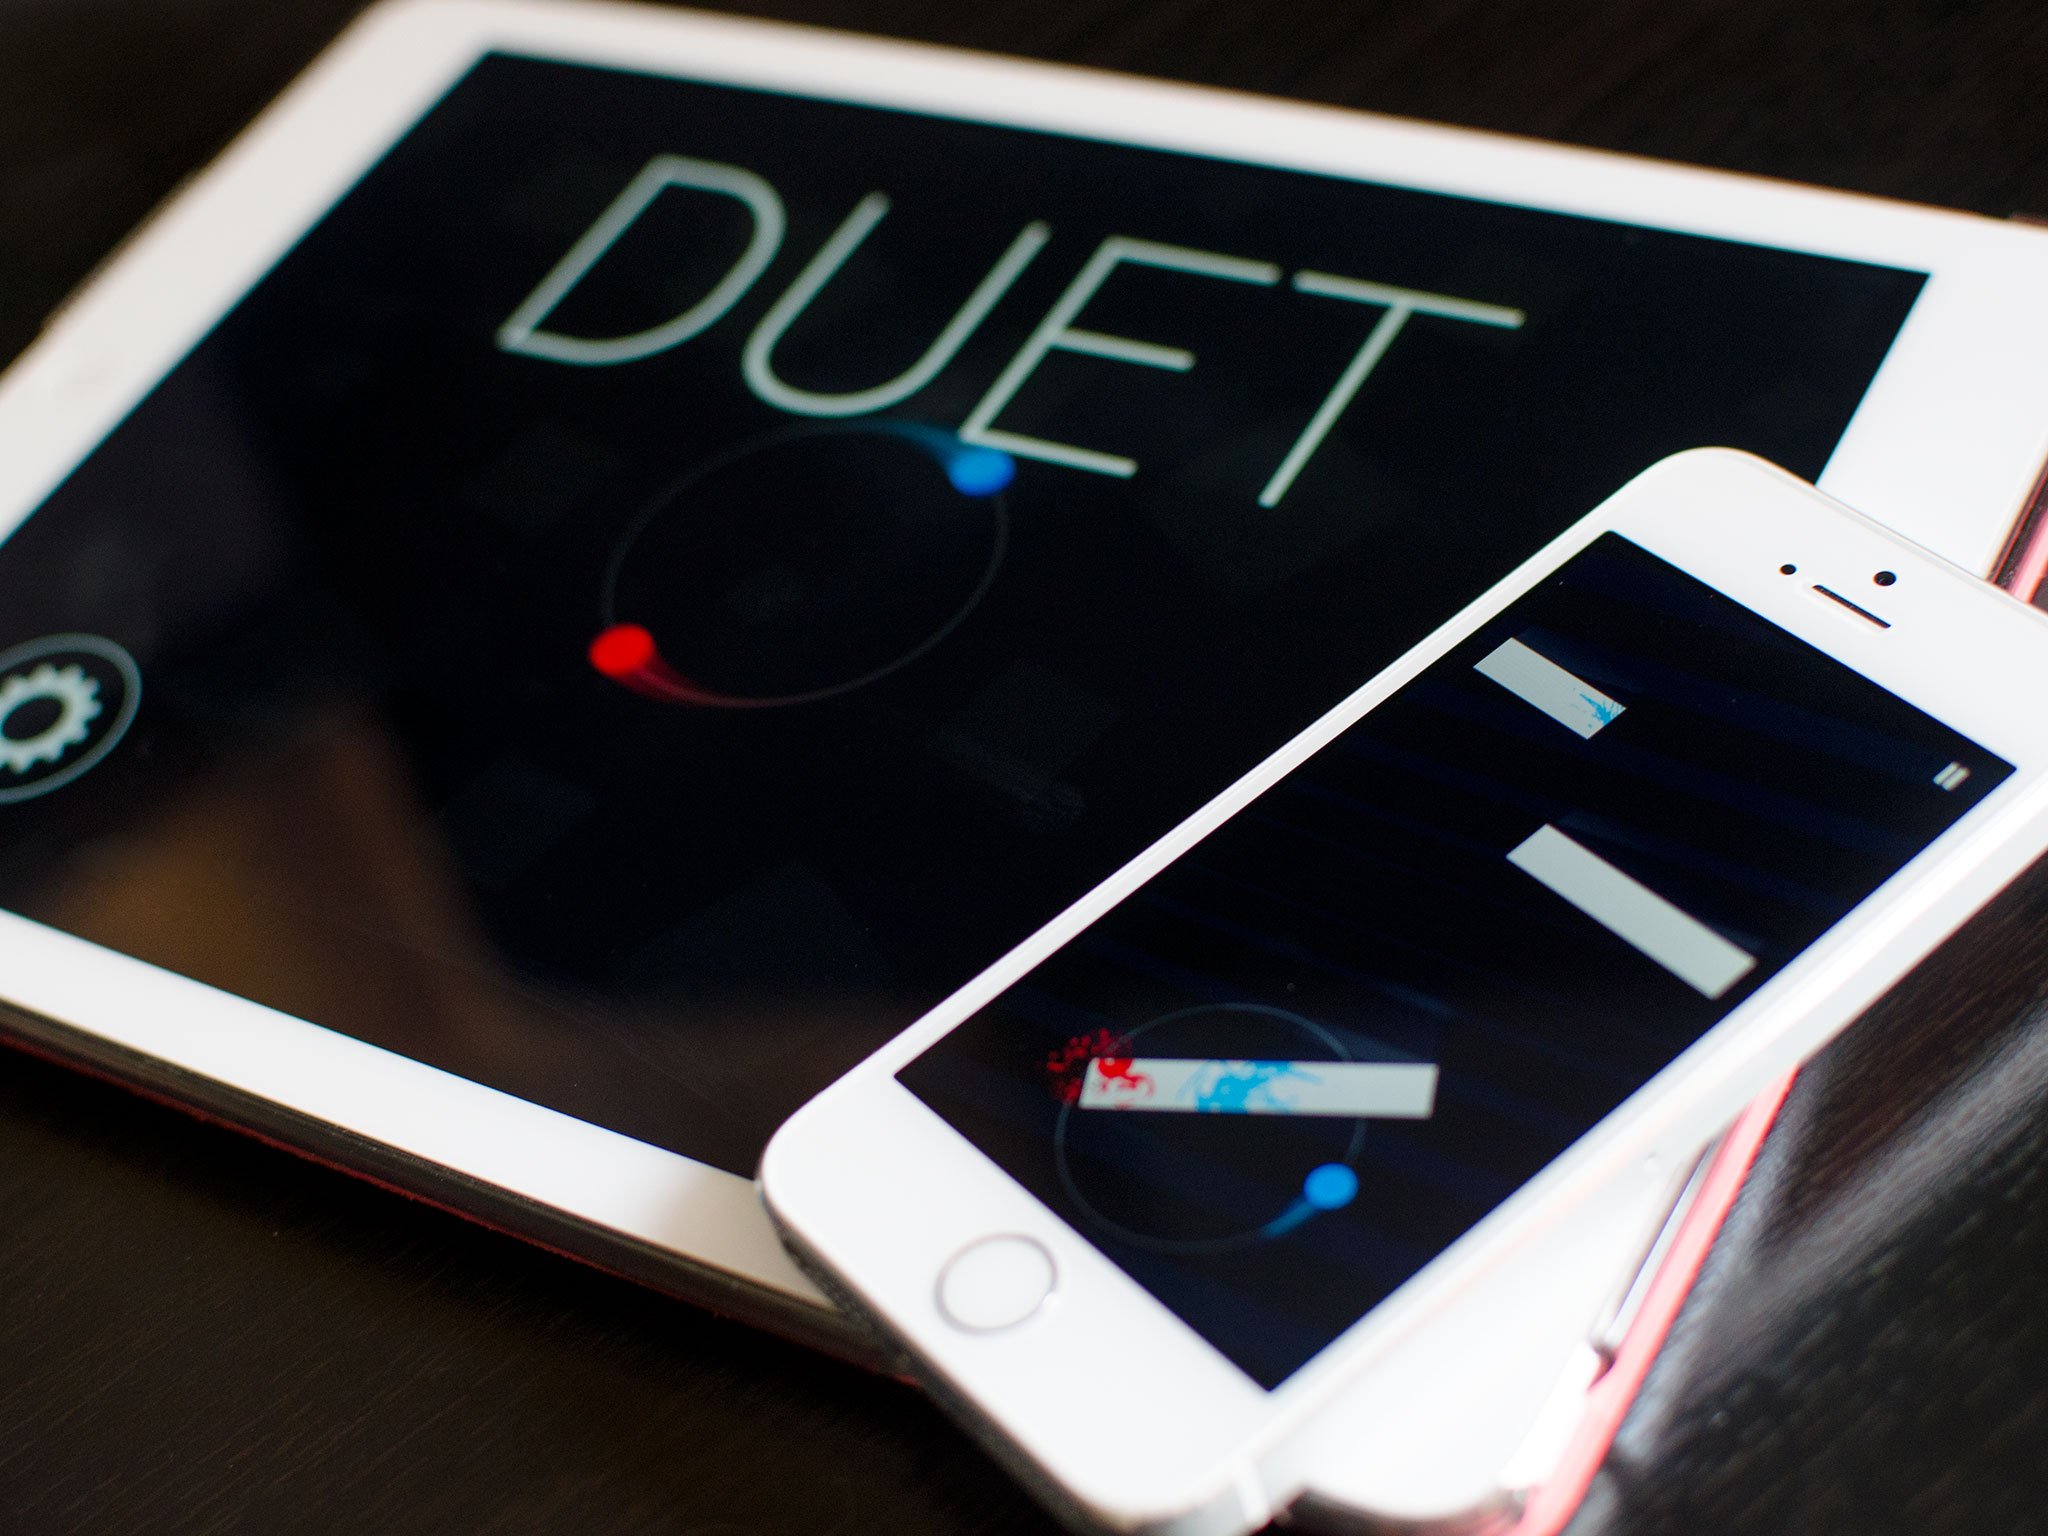 Duet Game: Top 10 tips and tricks!